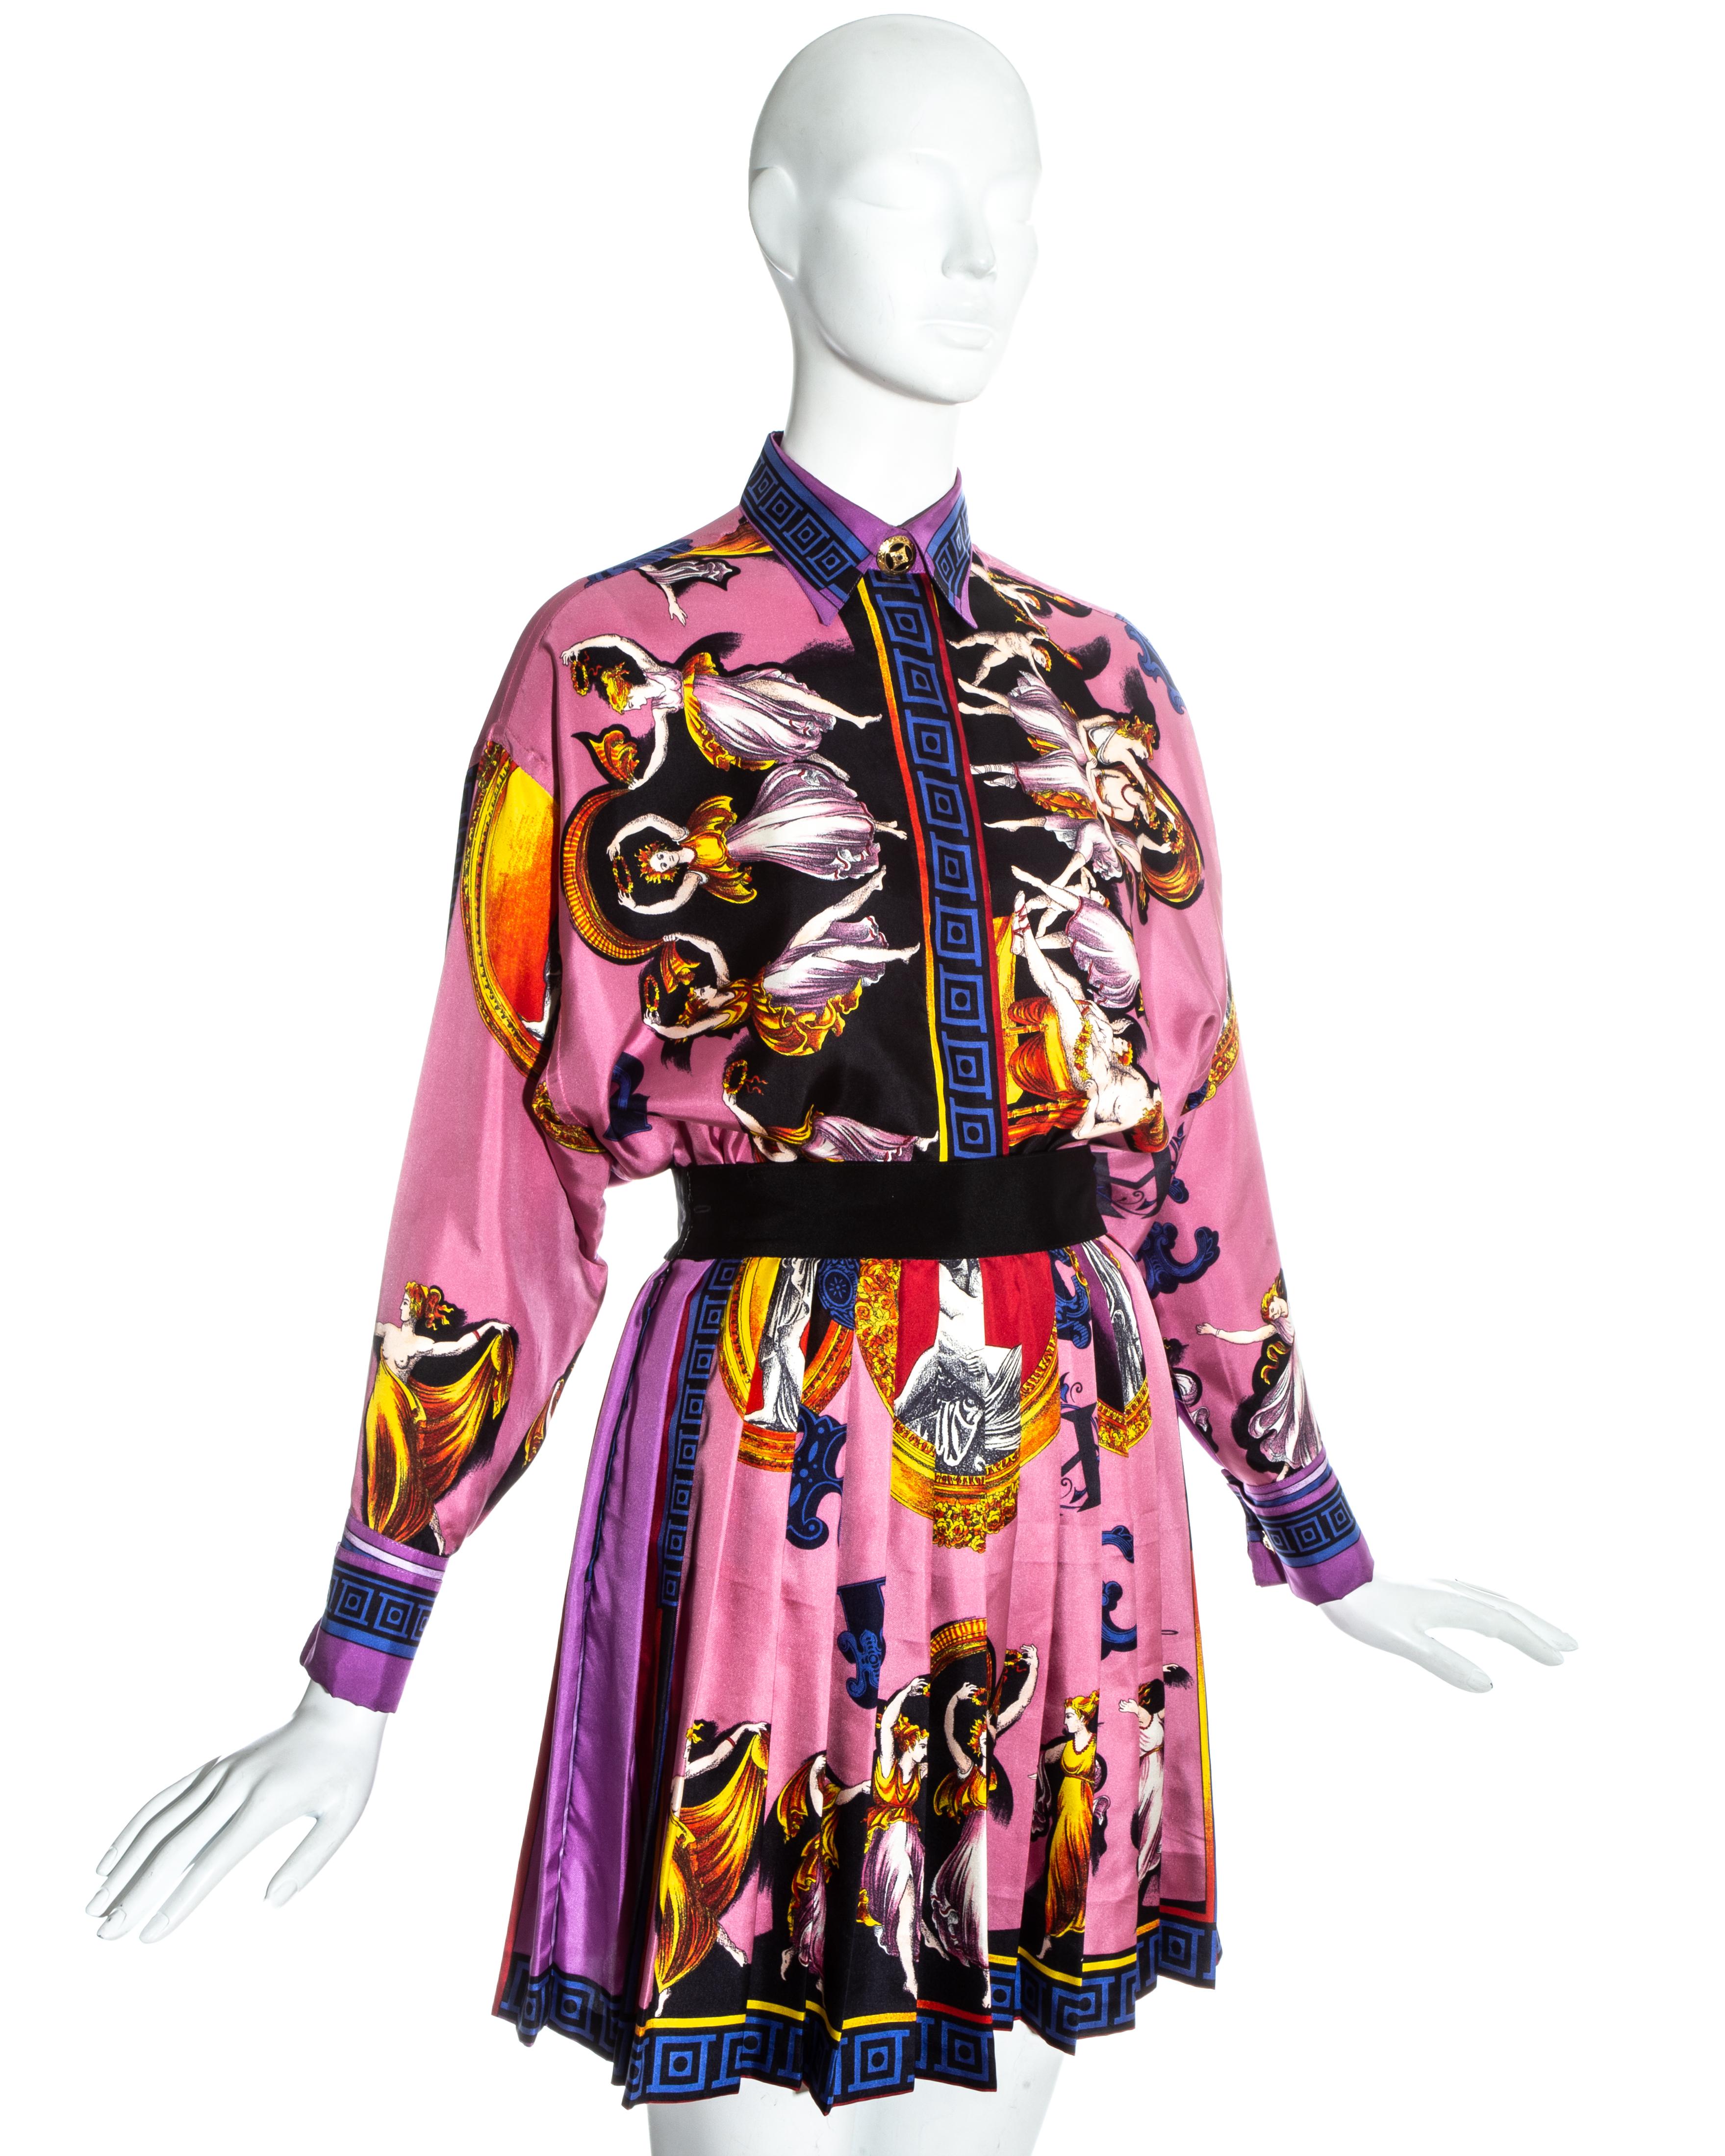 Gianni Versace pink silk skirt suit with a colourful neoclassical print. Loose cut blouse with large gold buttons on collar and cuffs. High waisted pleated skirt with black waistband. 

Fall-Winter 1991